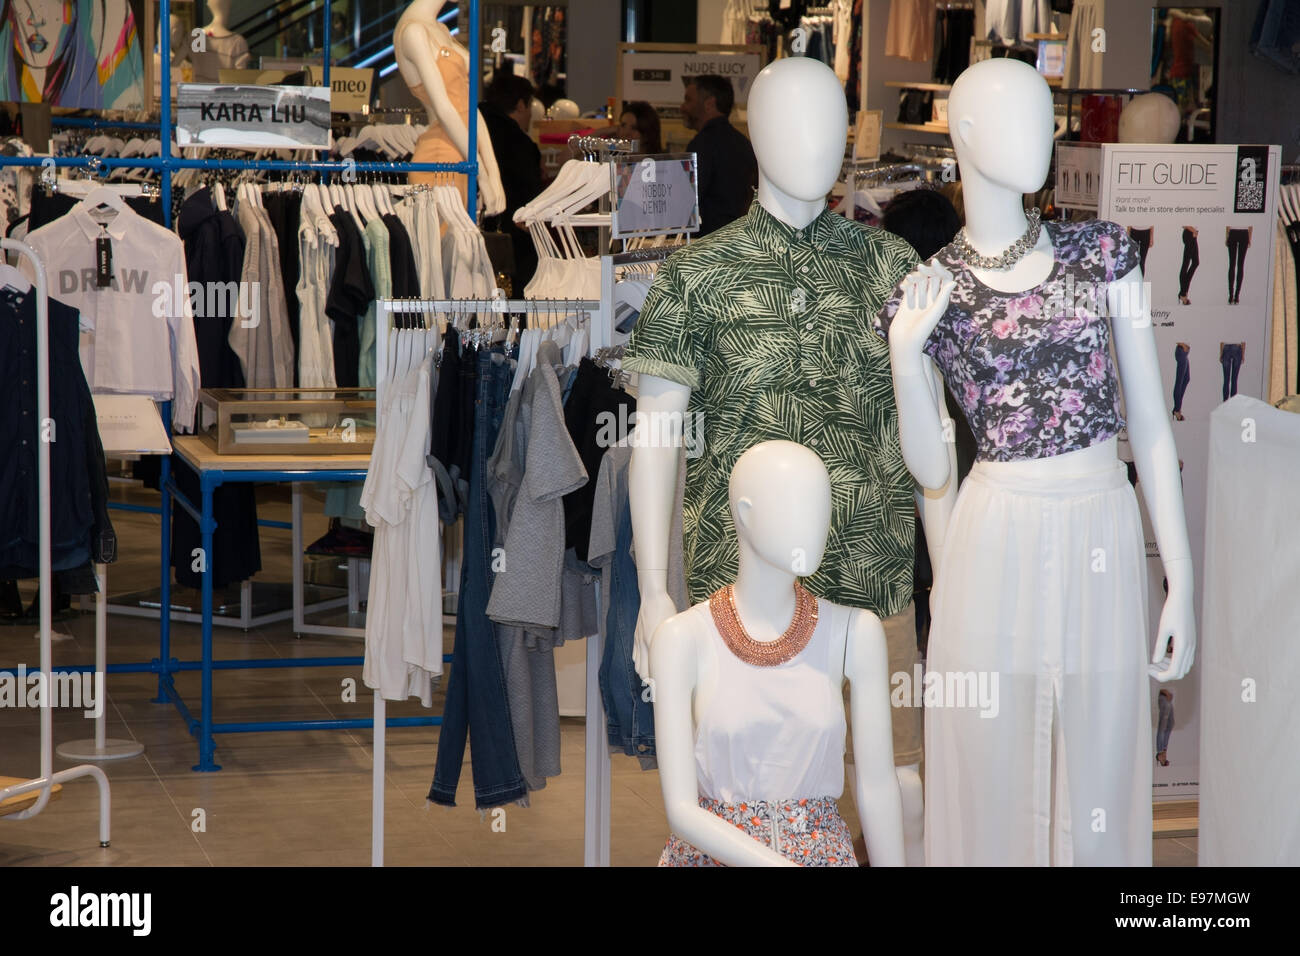 Mannequins In Retail Clothing Store Display Stock Photo